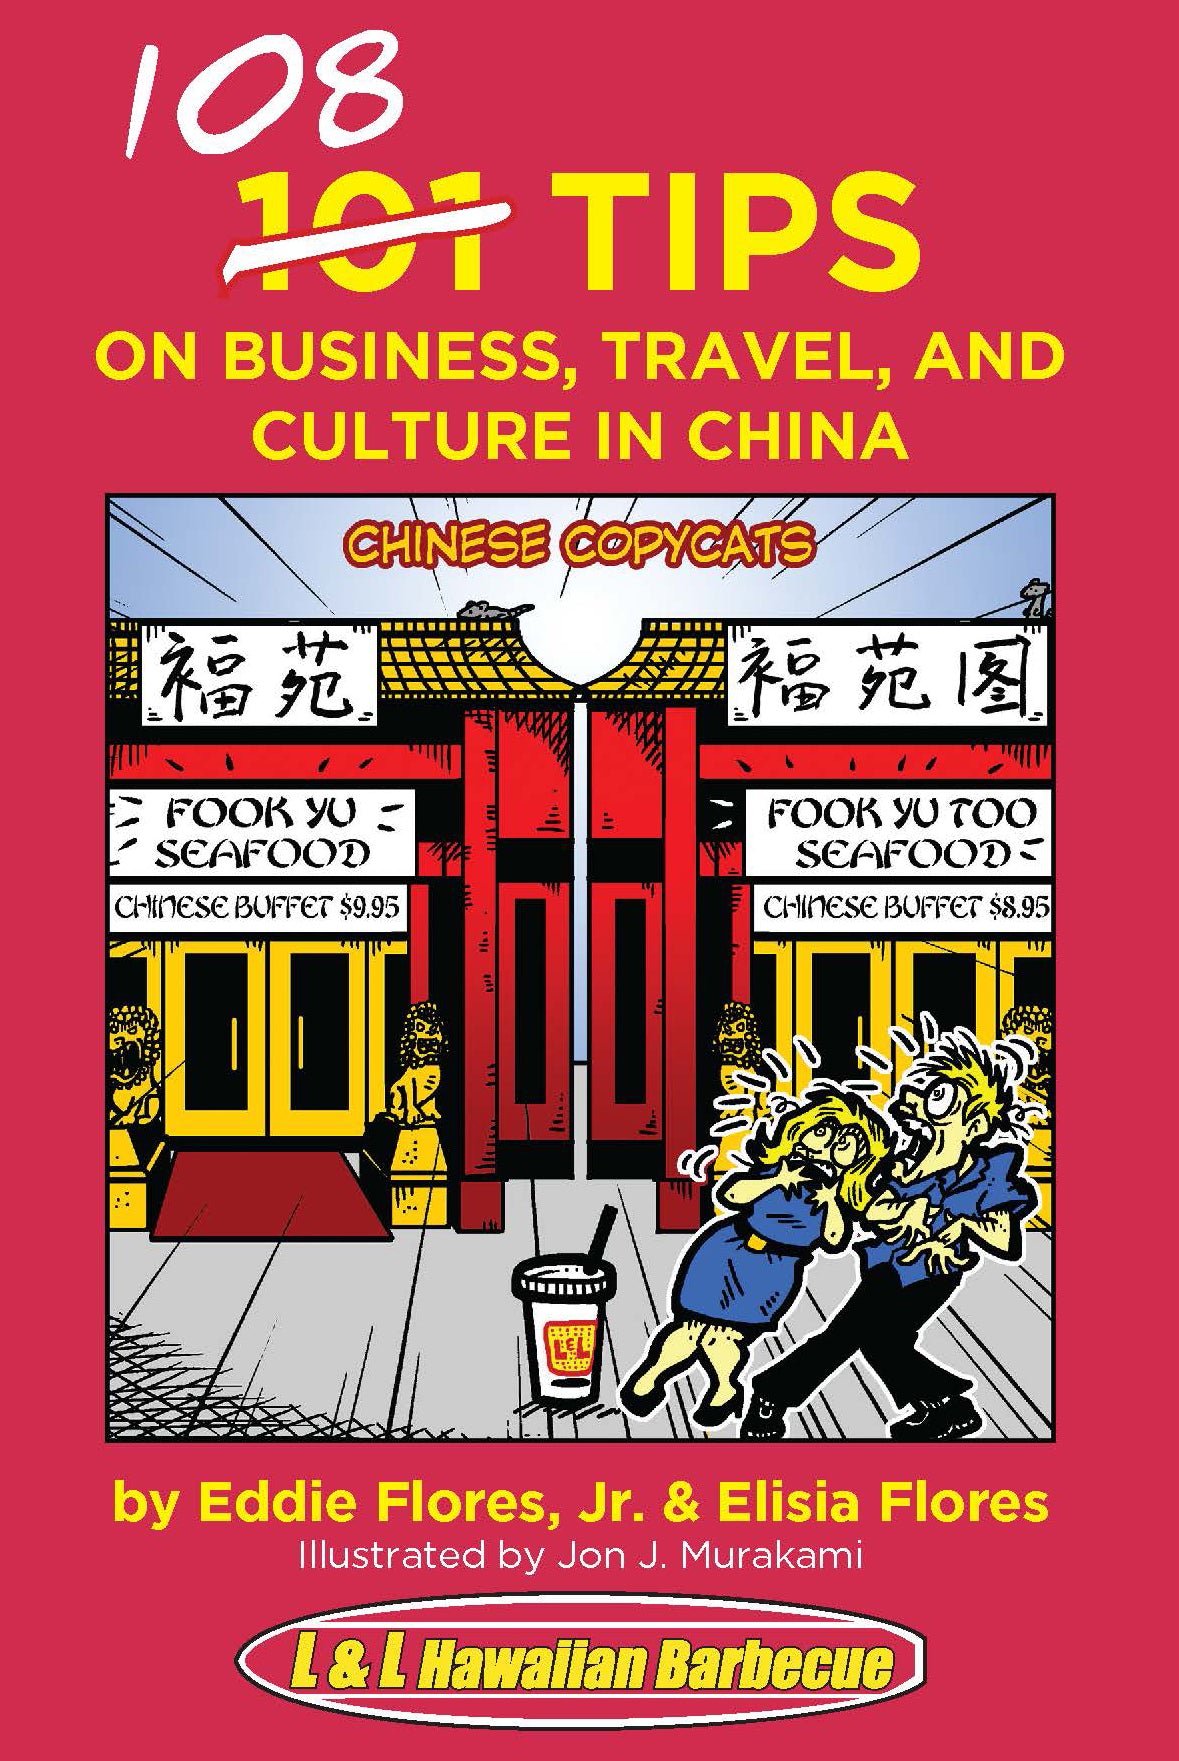 108 Tips on Business, Travel, and Culture in China